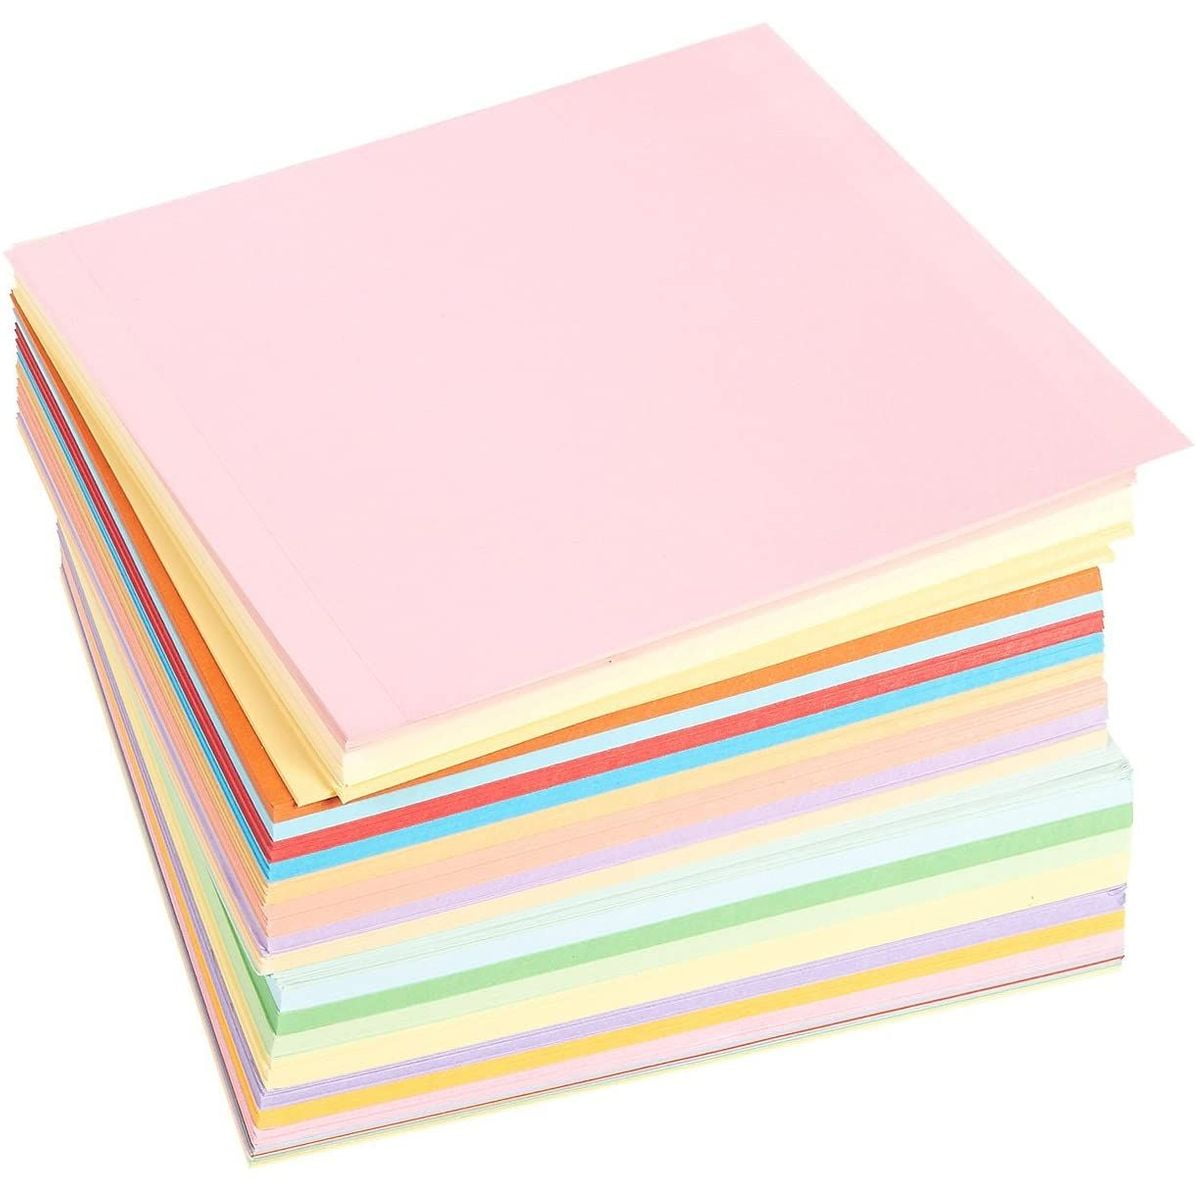 300 Pcs Origami Colored Safe Manual Paper Hand Craft Paper for Classroom Office